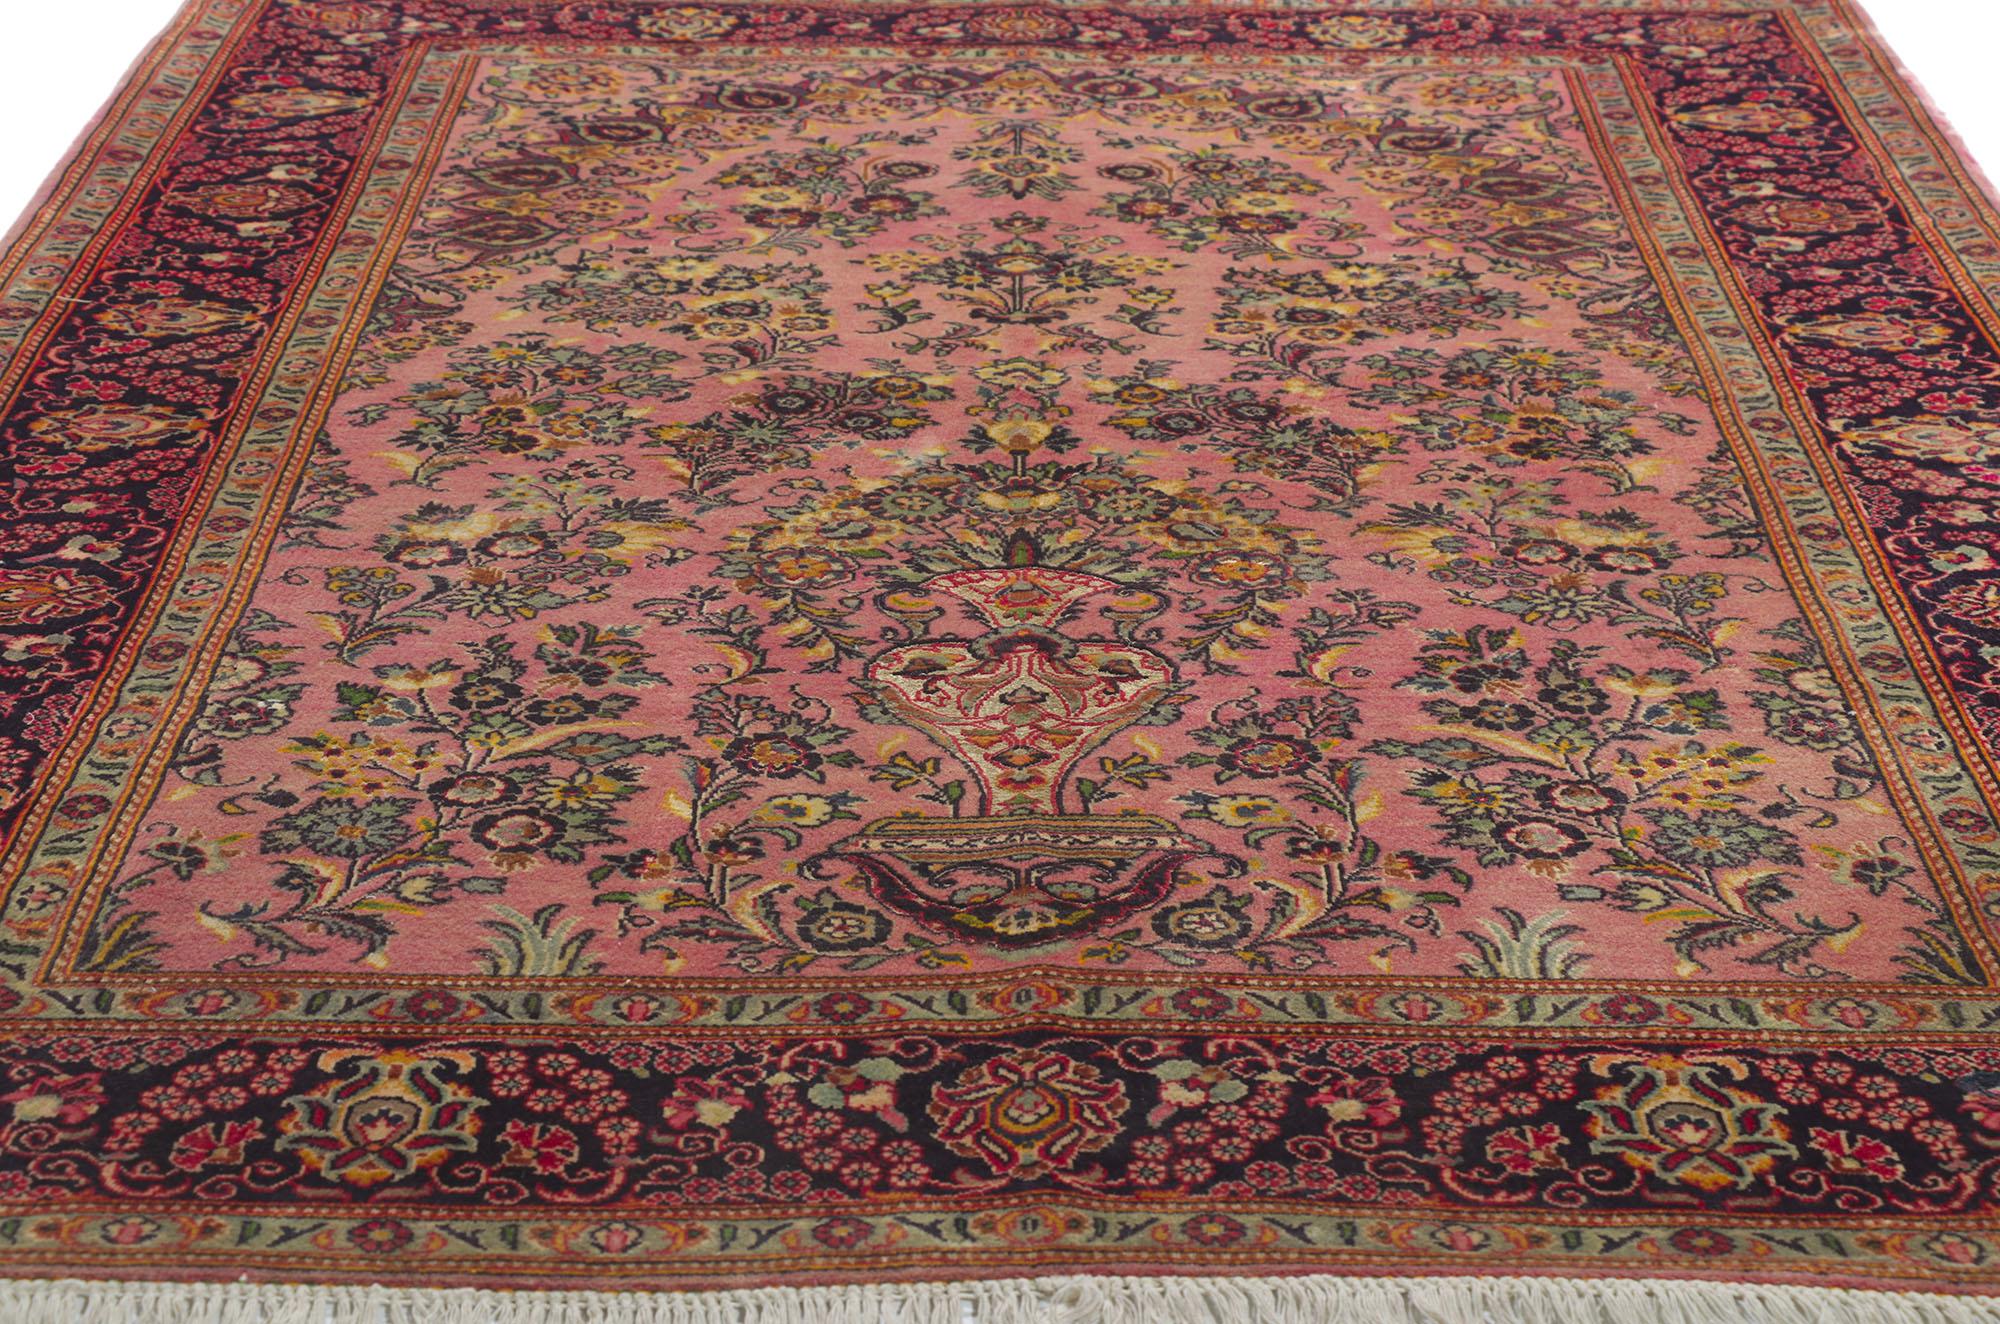 Vintage Persian Kashan Rug with Vase Design In Good Condition For Sale In Dallas, TX